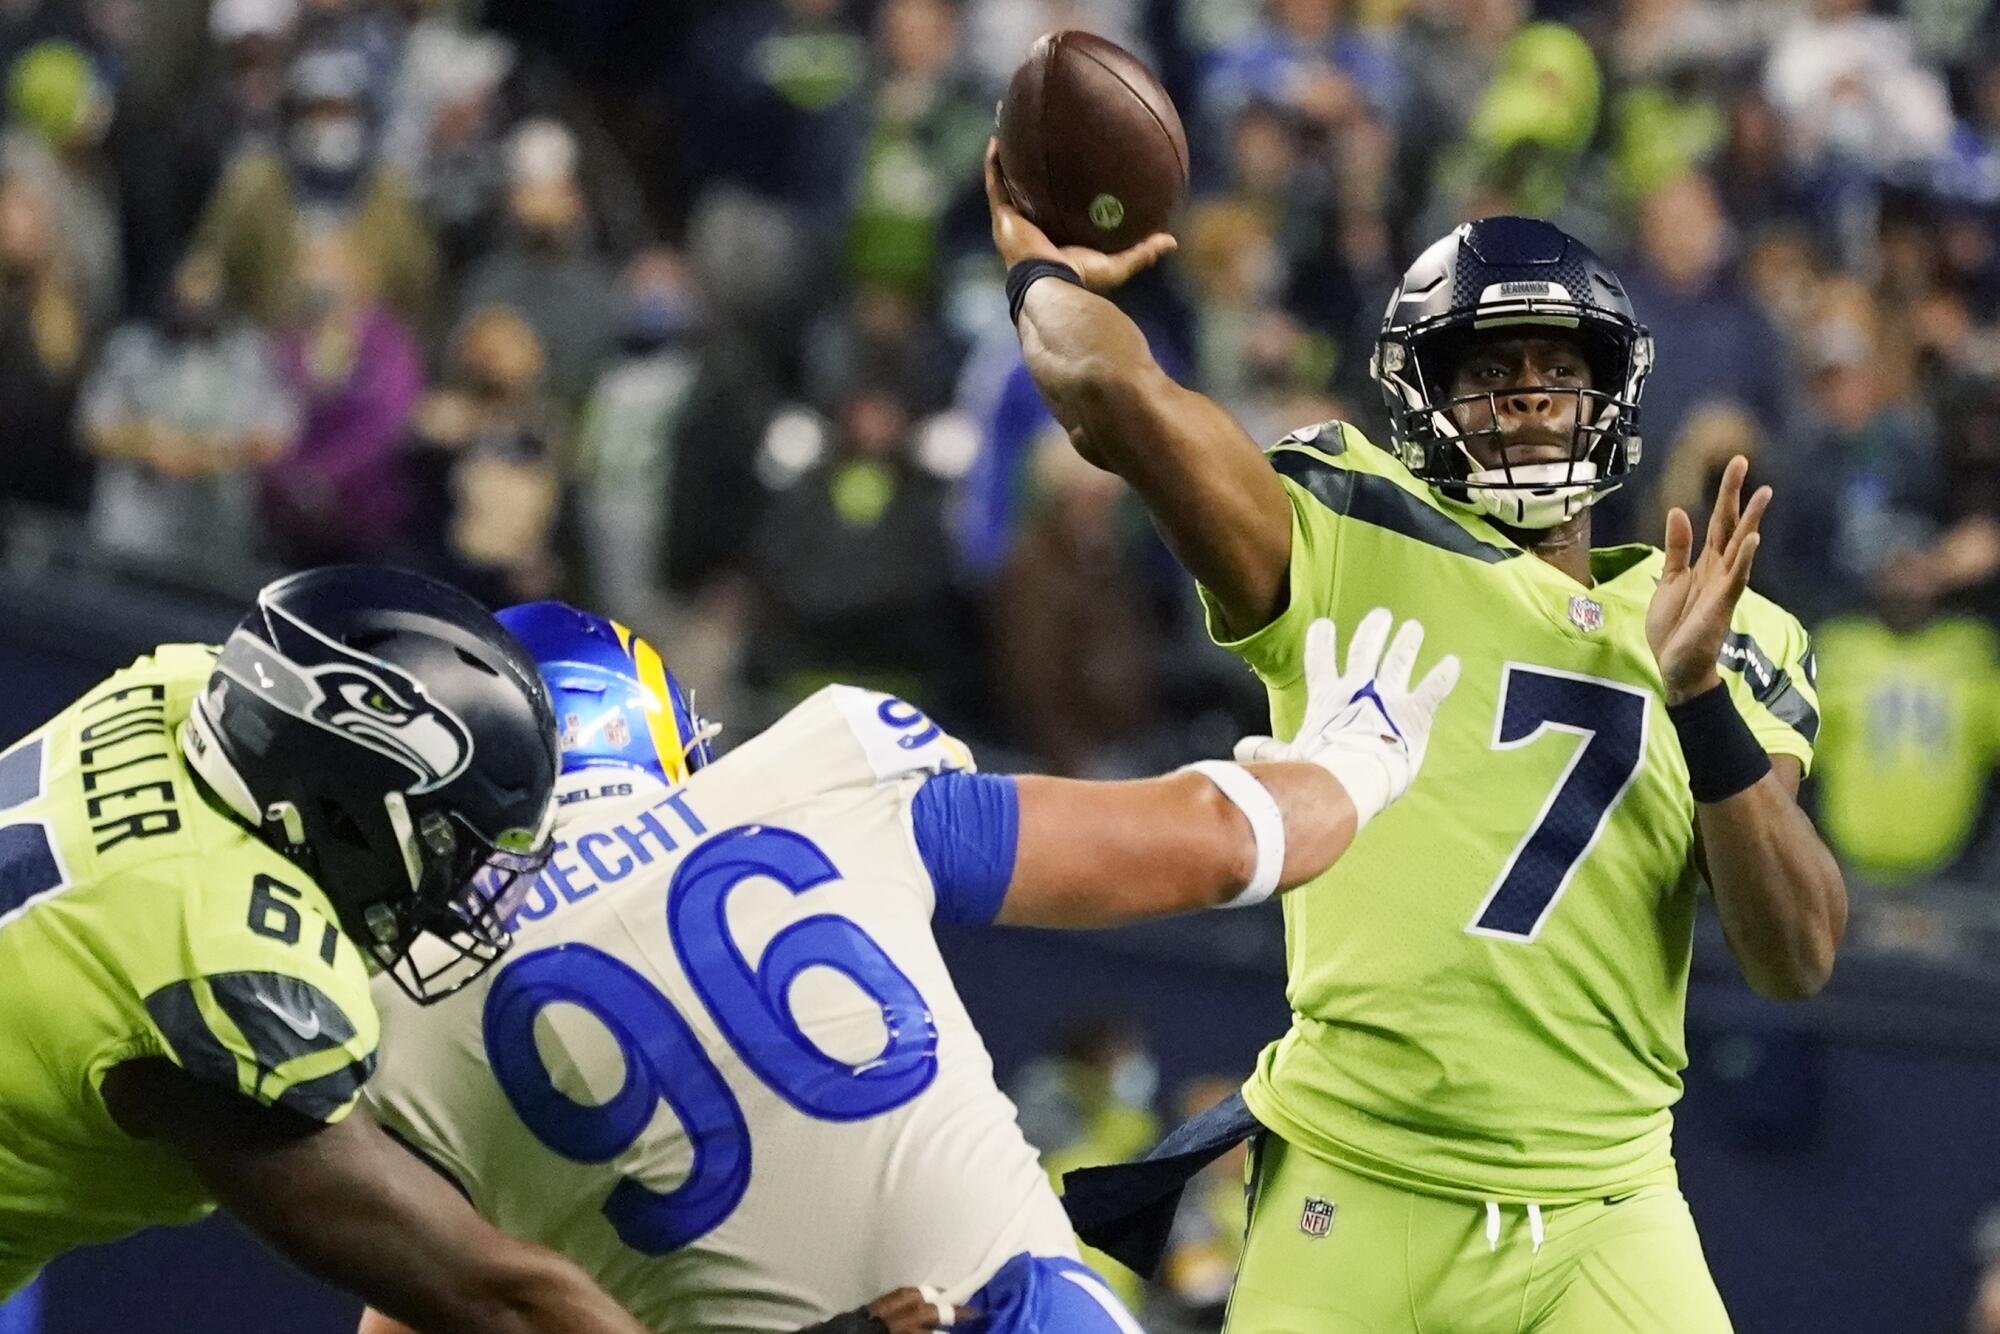 Seattle Seahawks backup quarterback Geno Smith passes to wide receiver DK Metcalf for a touchdown.